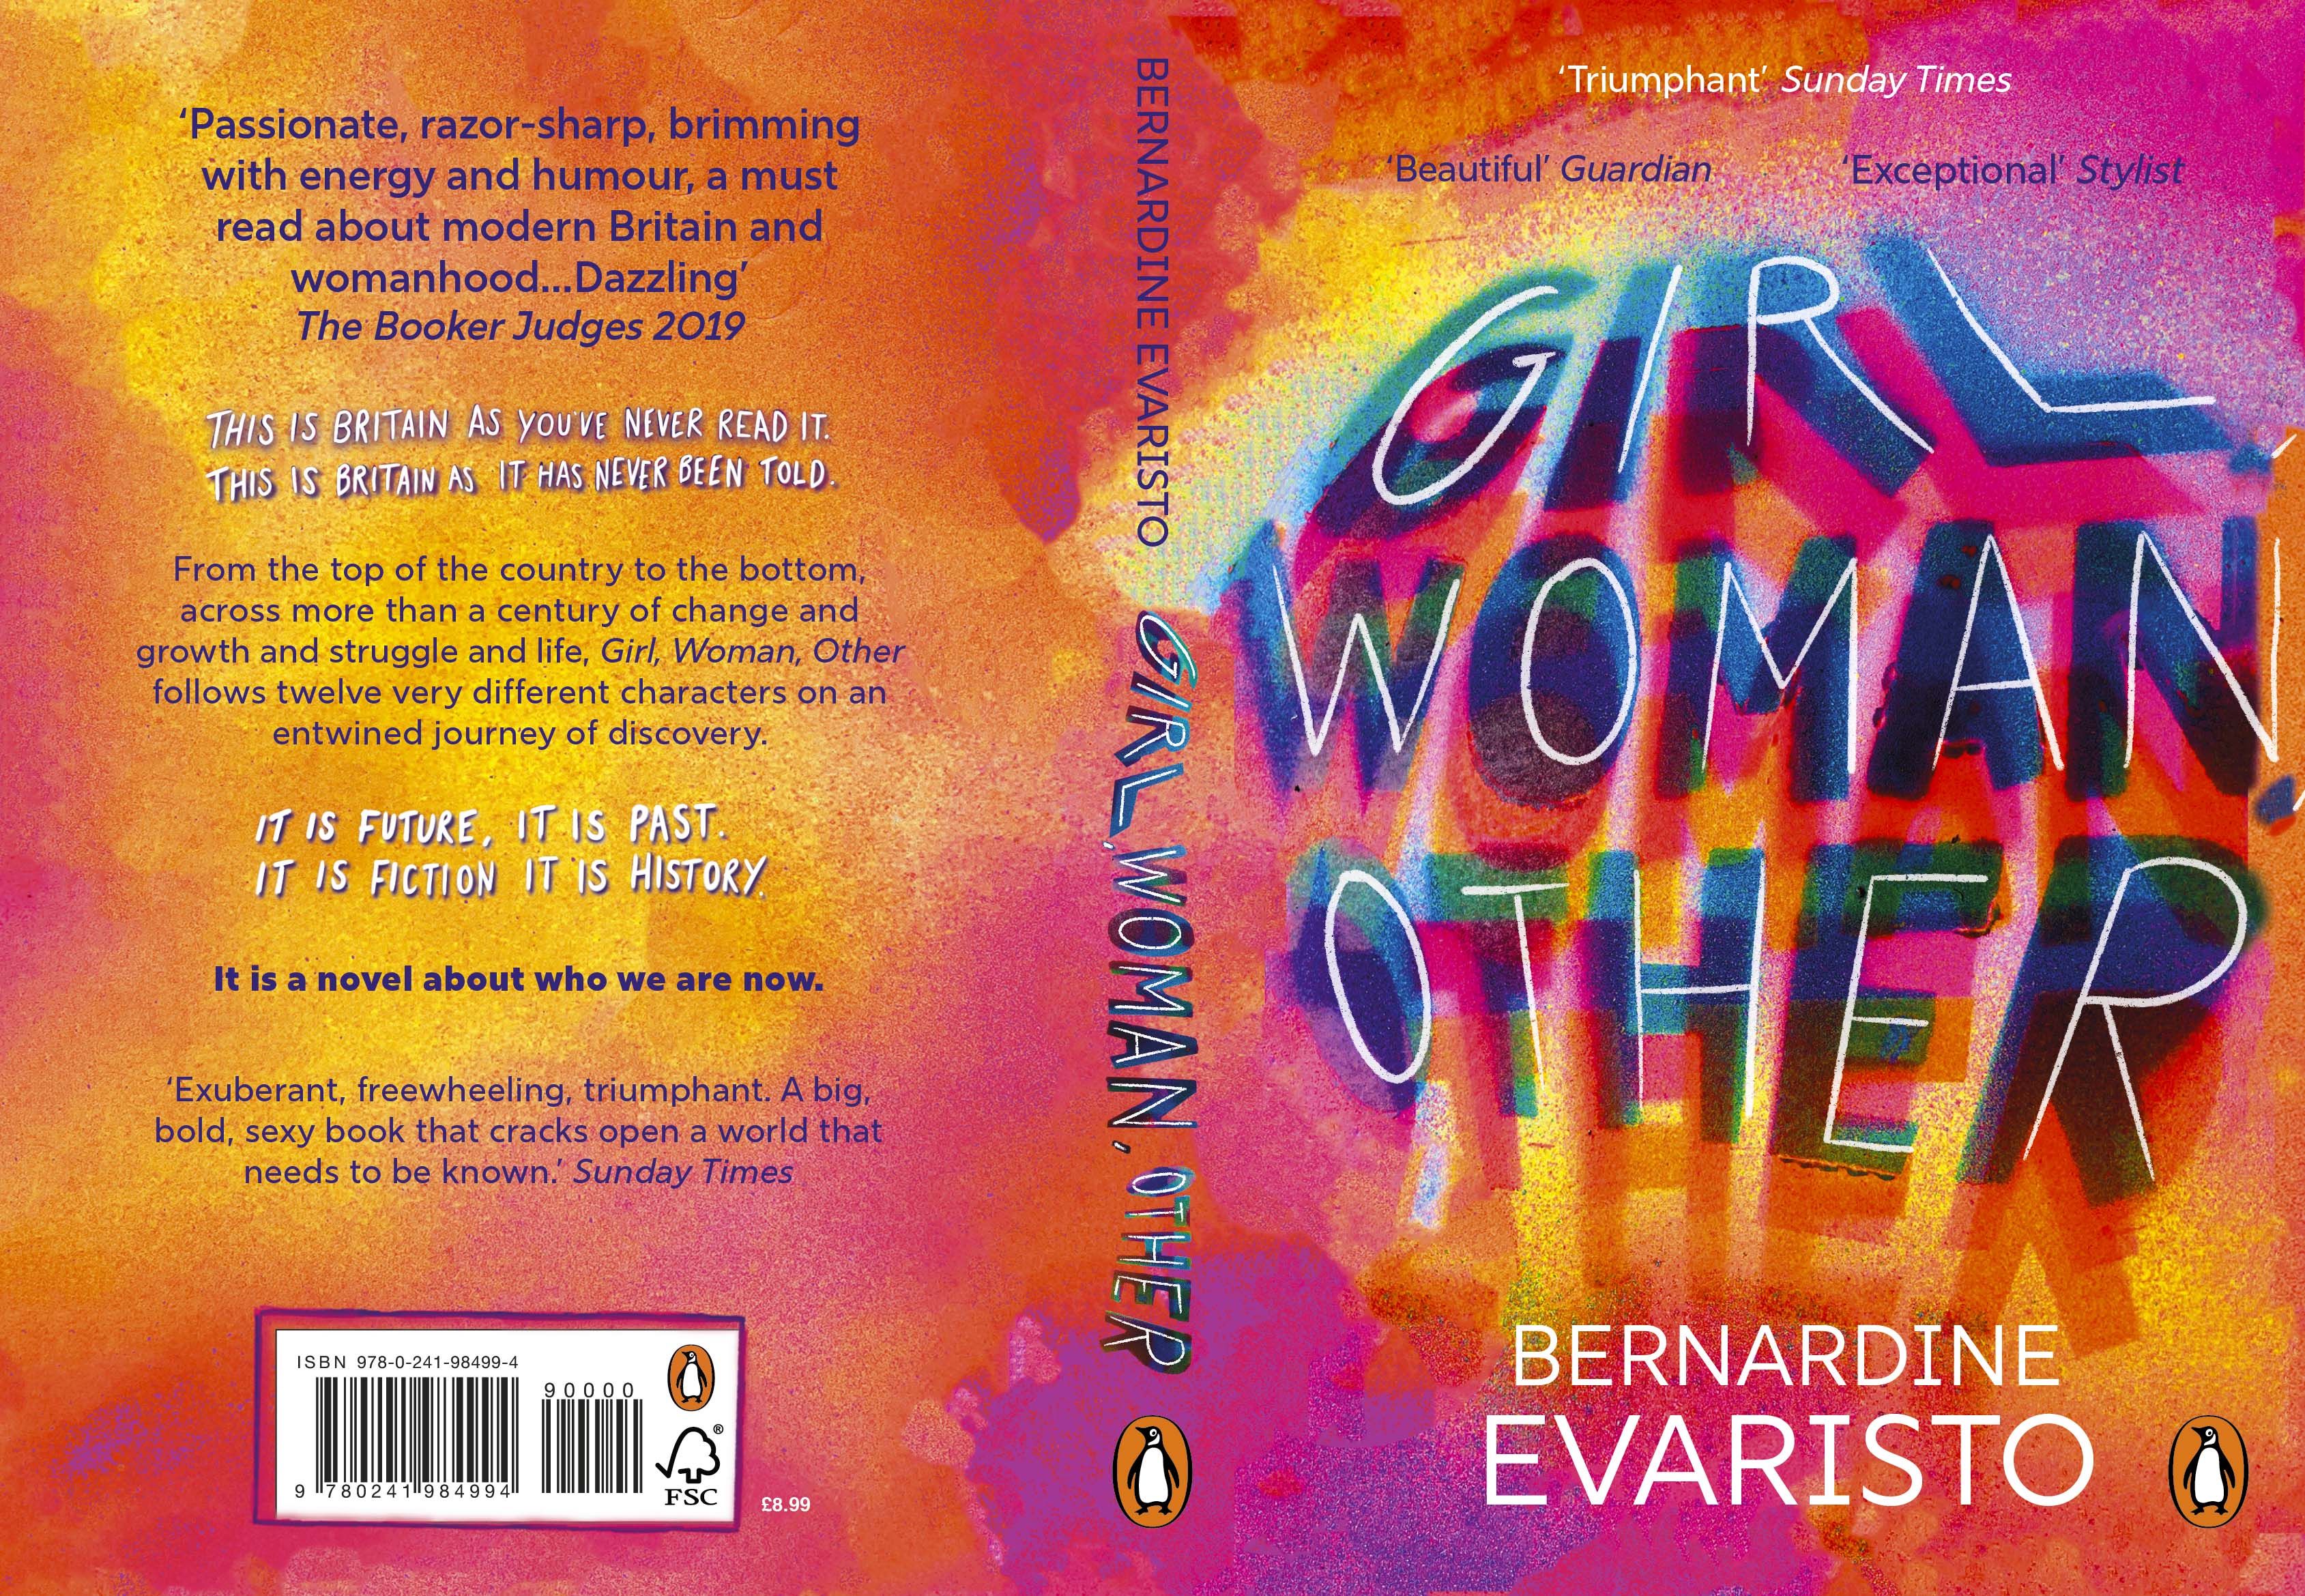 Book cover design by Katie Foreman, including a typographic response that has been created through spray painting and overlaying typography. Including bright neon colours, mostly pinks, blues, yellows, and oranges.